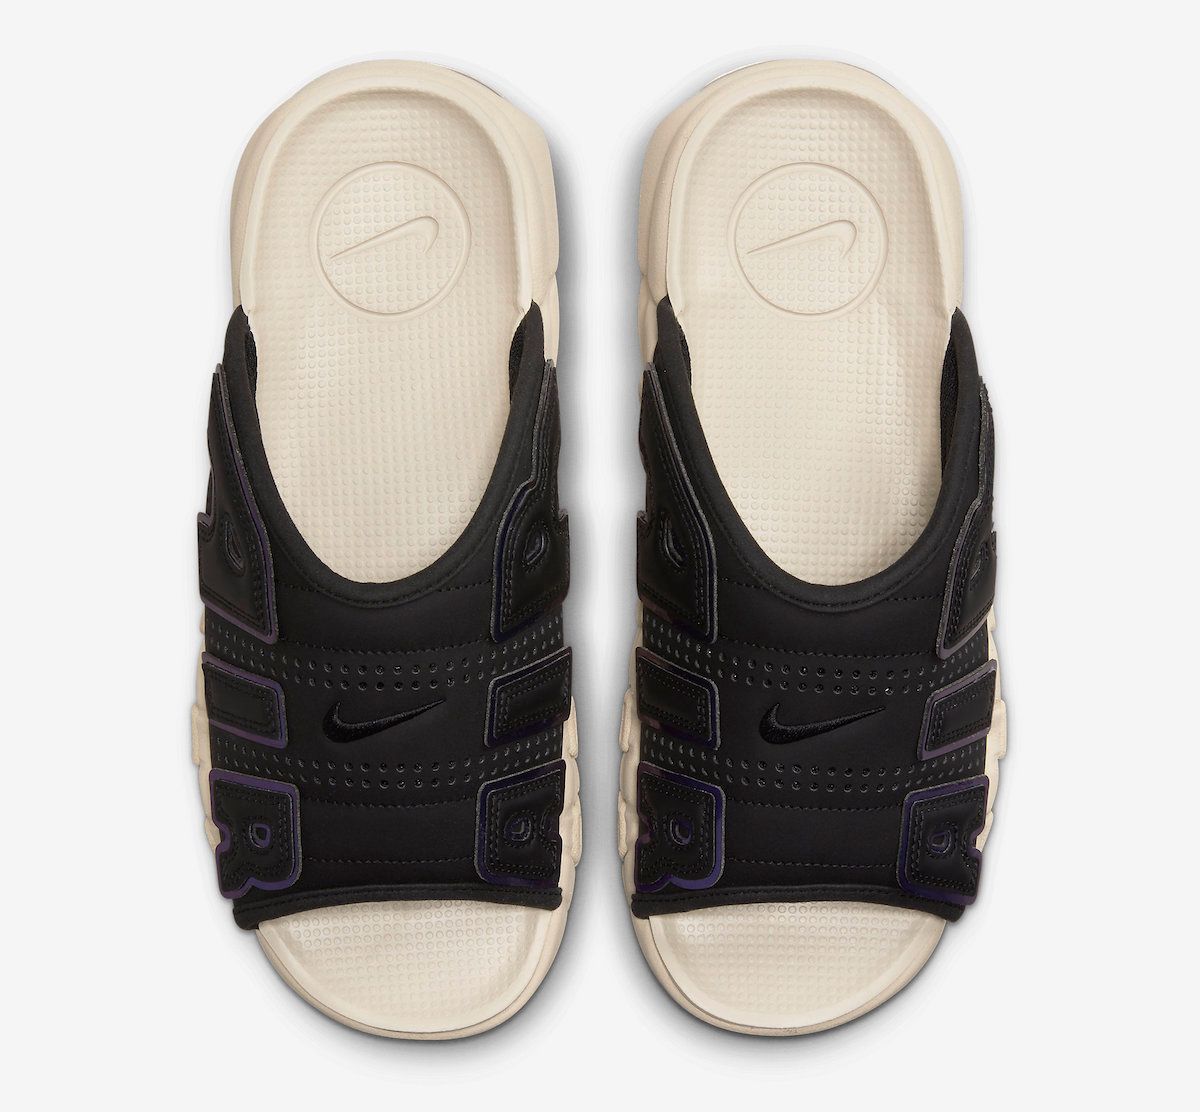 First Official Look At The Nike Air More Uptempo Slide - TheSiteSupply